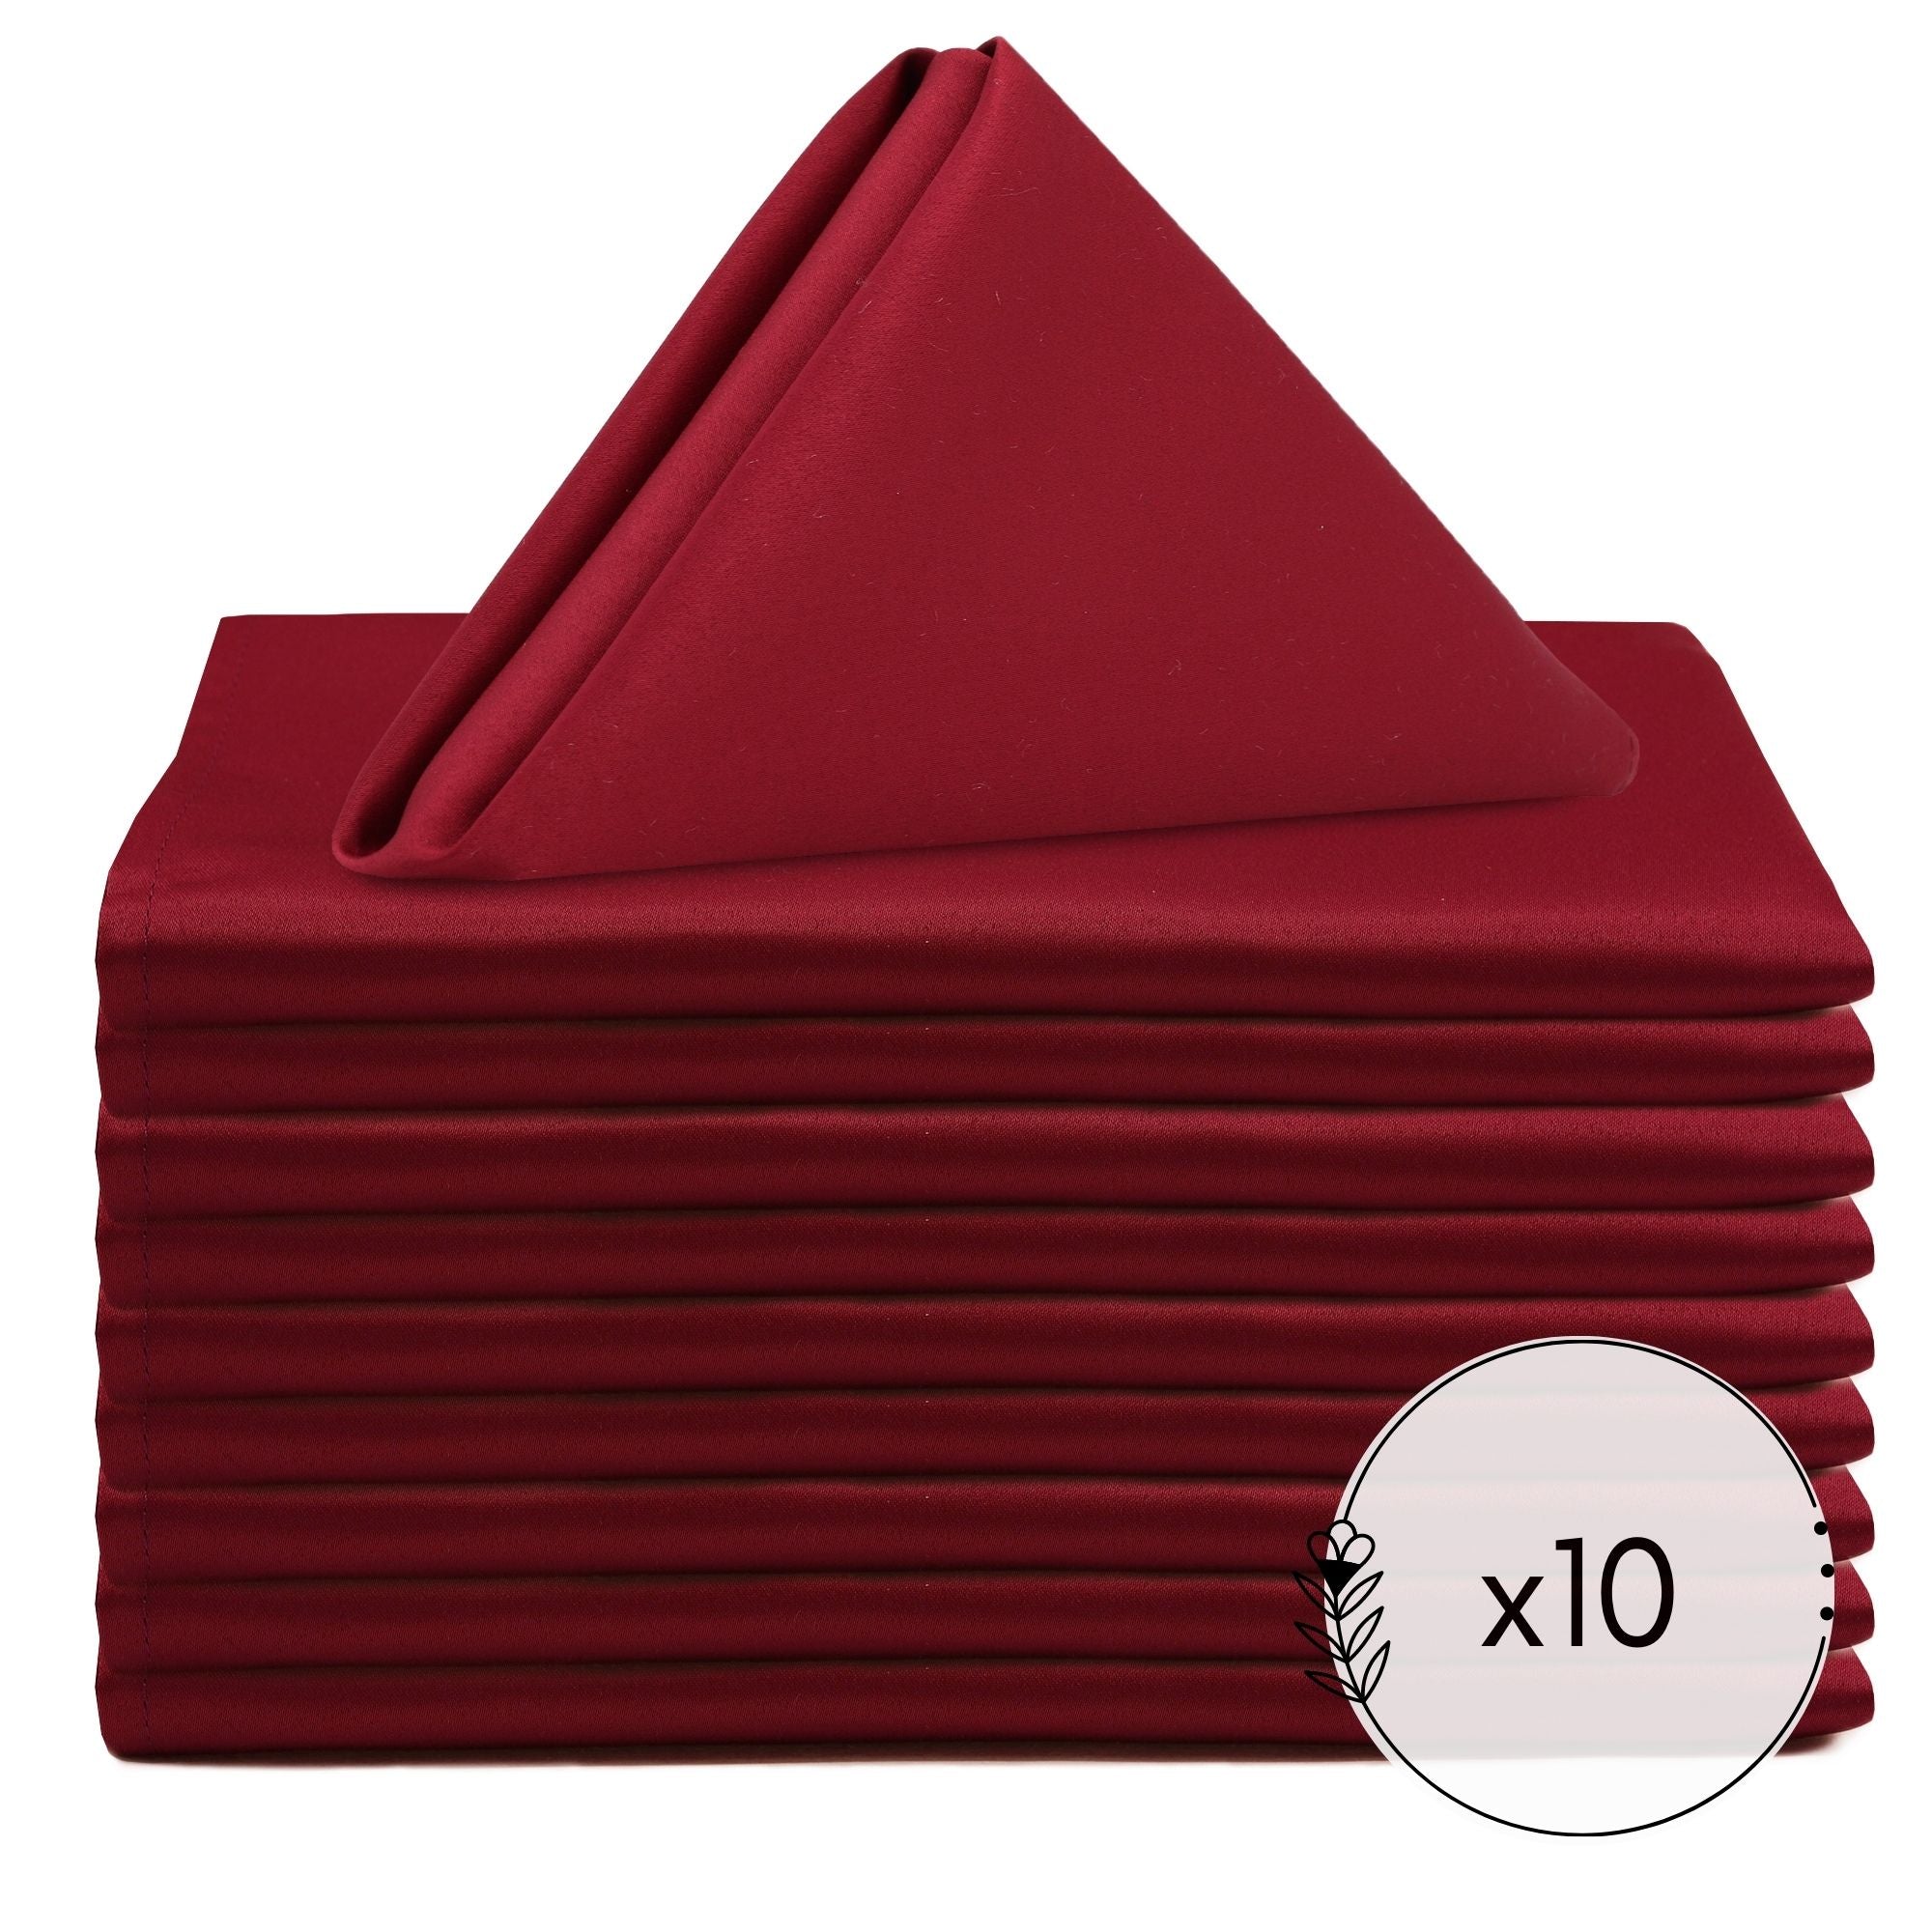 Your Chair Covers - 10 Pack 20 inch L'Amour Satin Napkins White